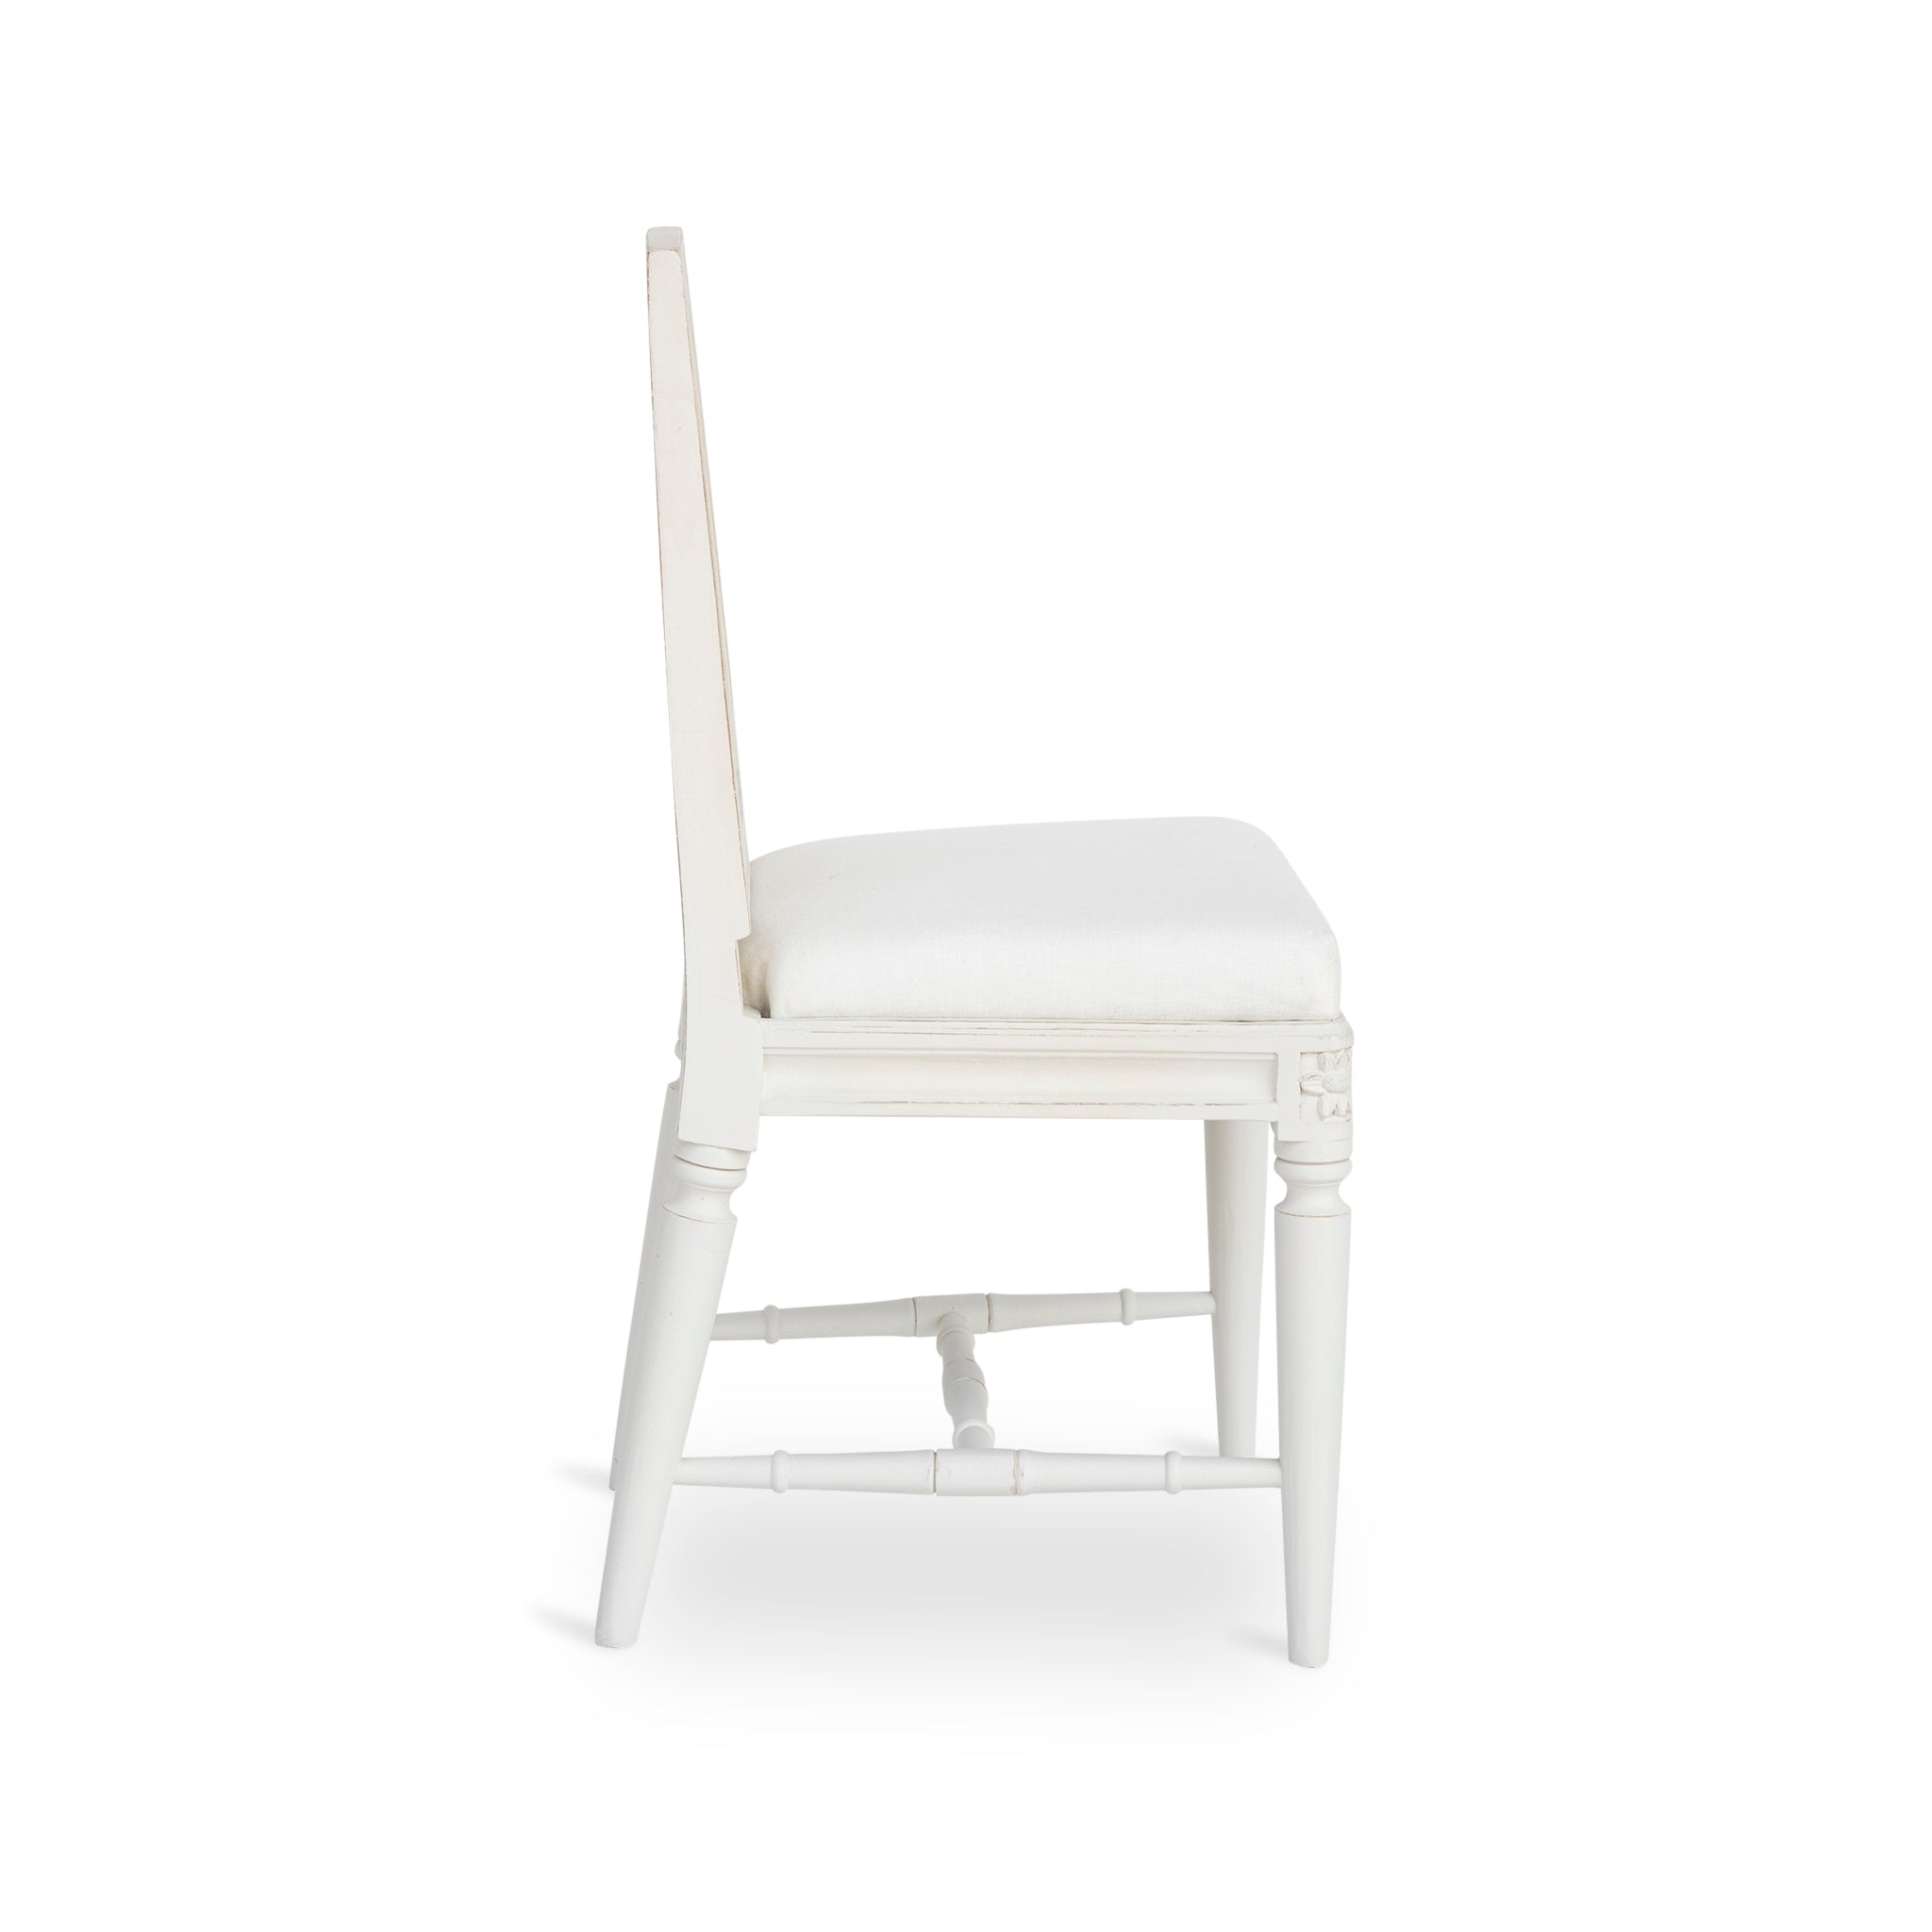 Side View of the Gustavian Dining Chair (Color - White) on a White Background